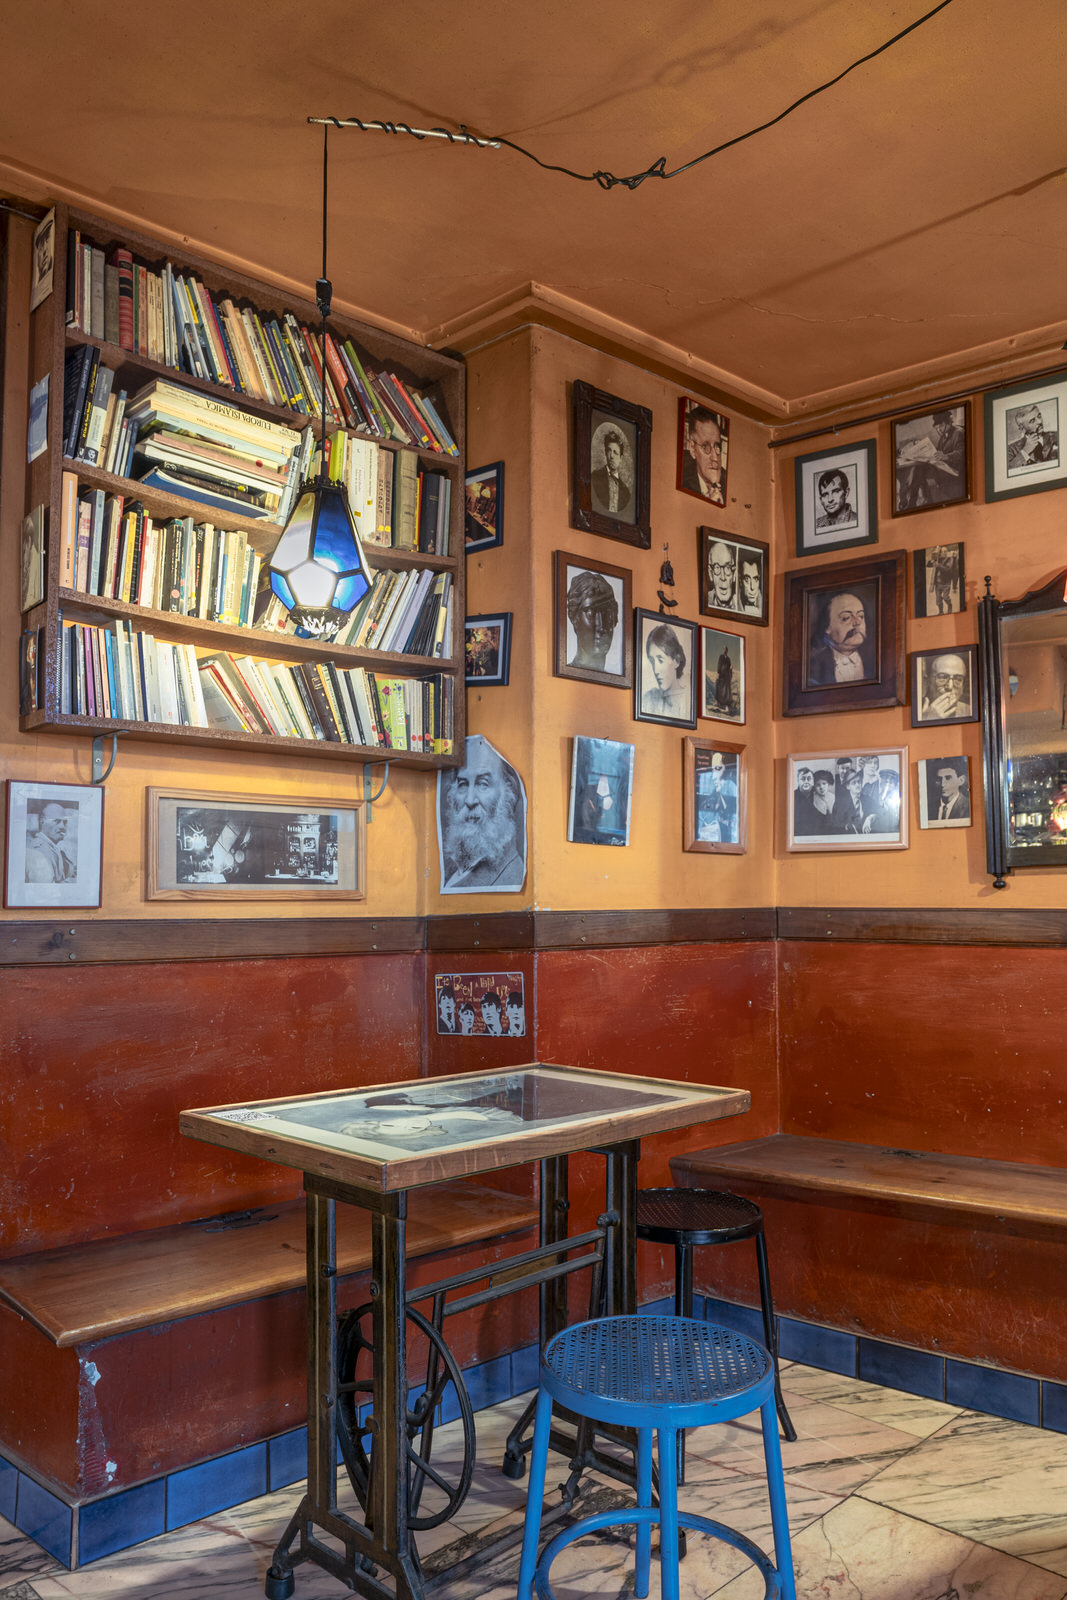 Image of the interior of the cafeteria, on the wall there are paintings, books and a table with stools